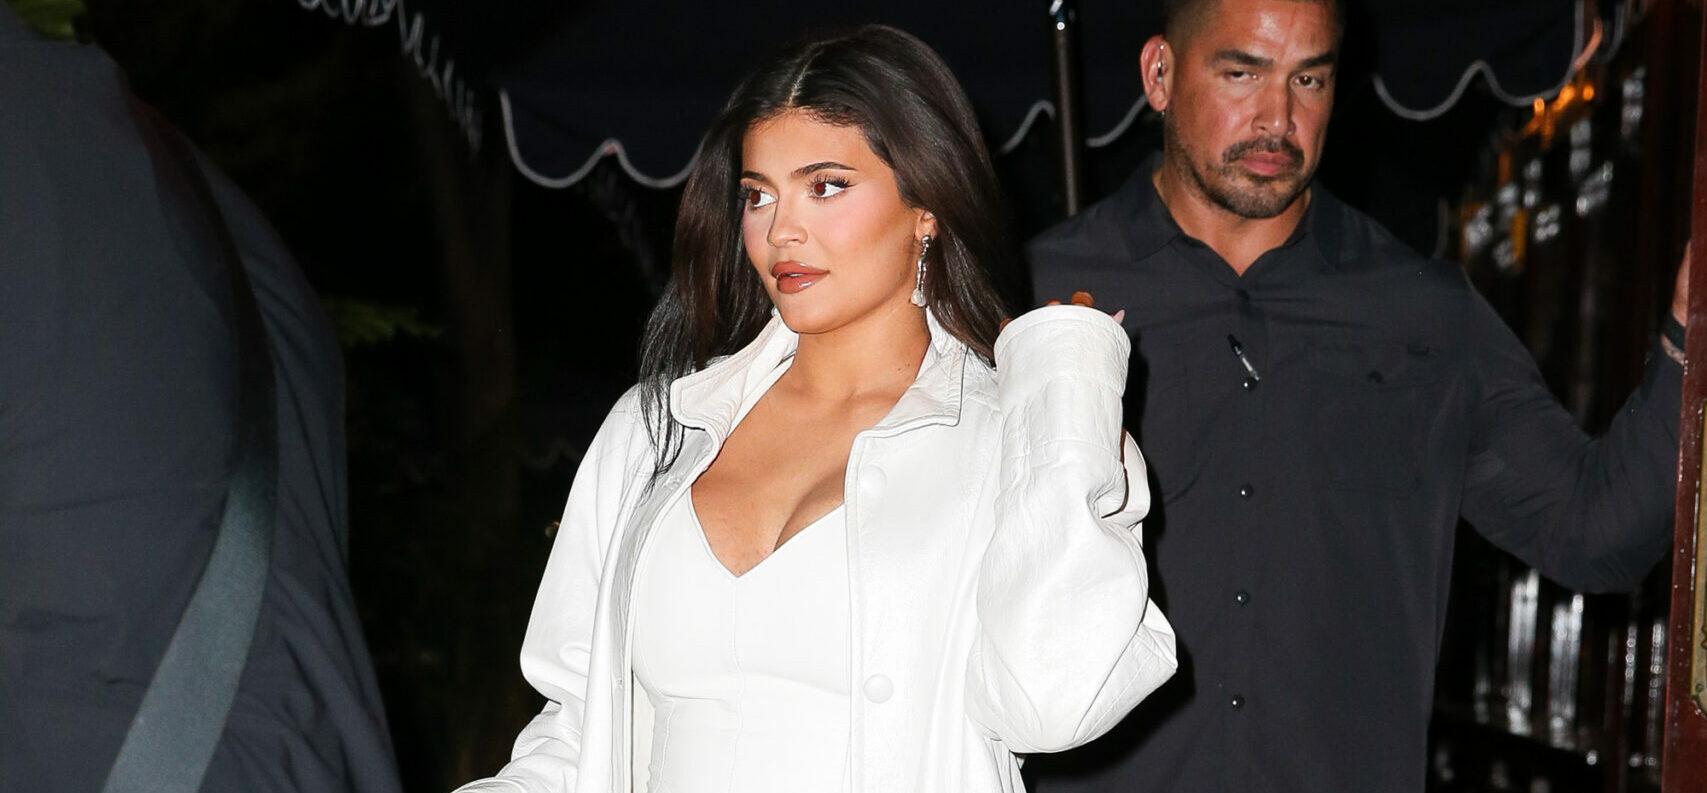 Pregnant Kylie Jenner was spotted leaving Carbone in NYC on Sep 08 2021